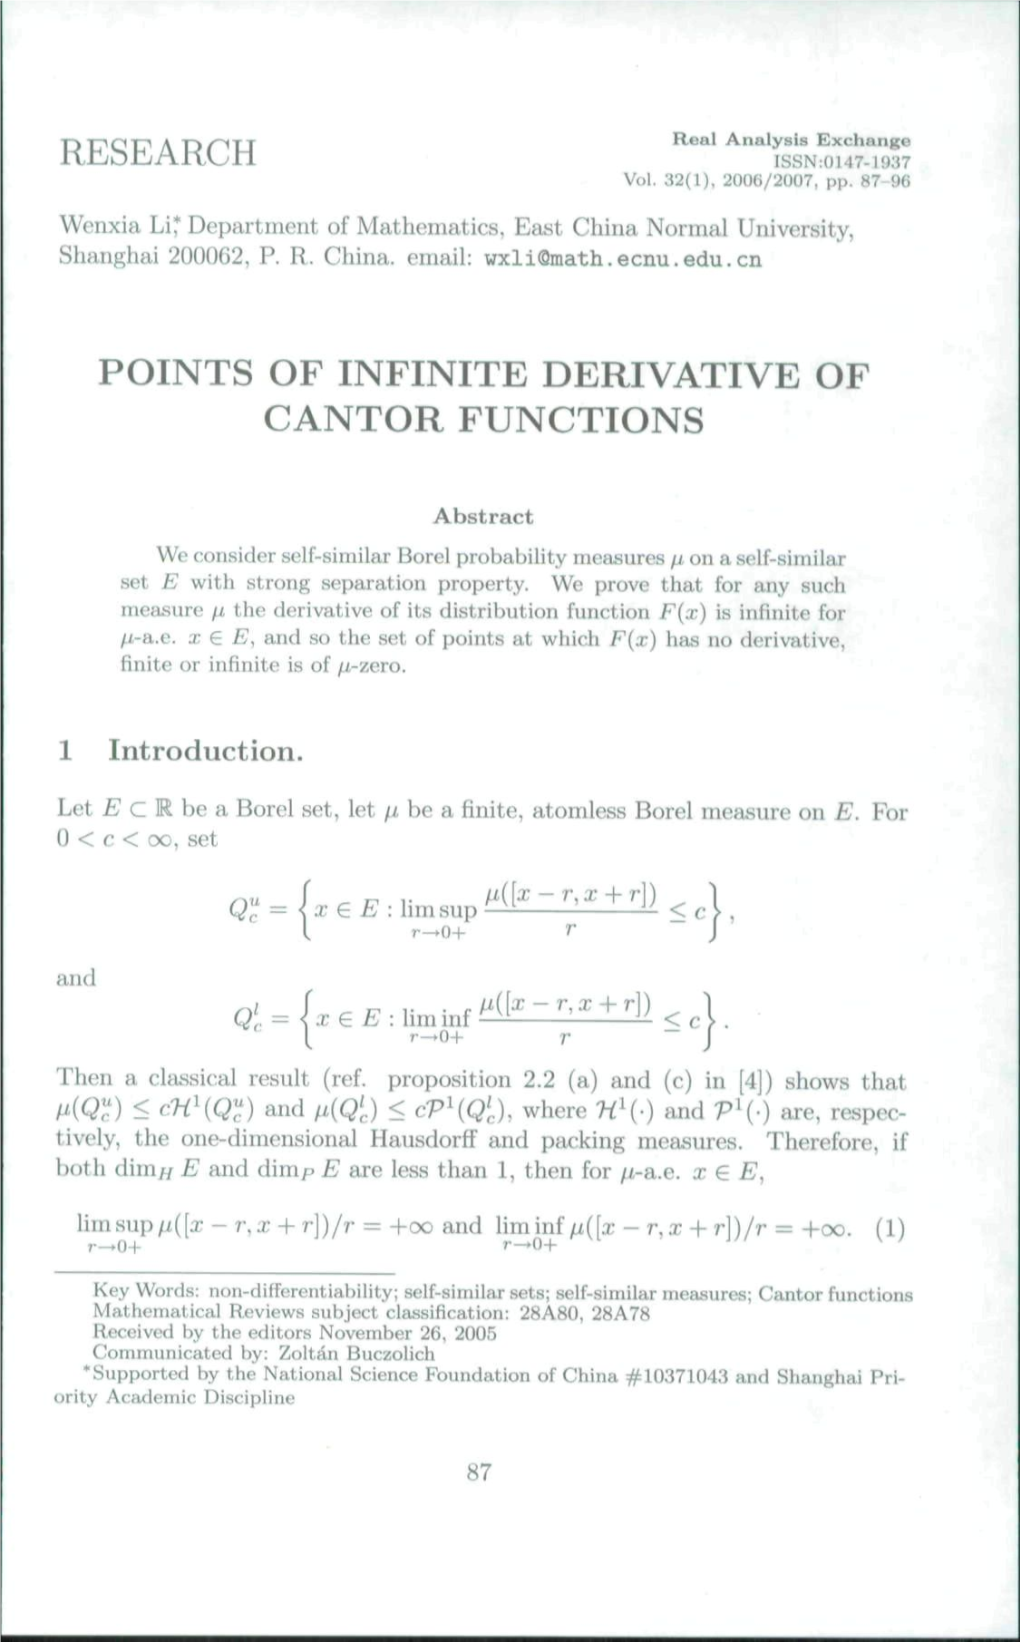 Points of Infinite Derivative of Cantor Functions